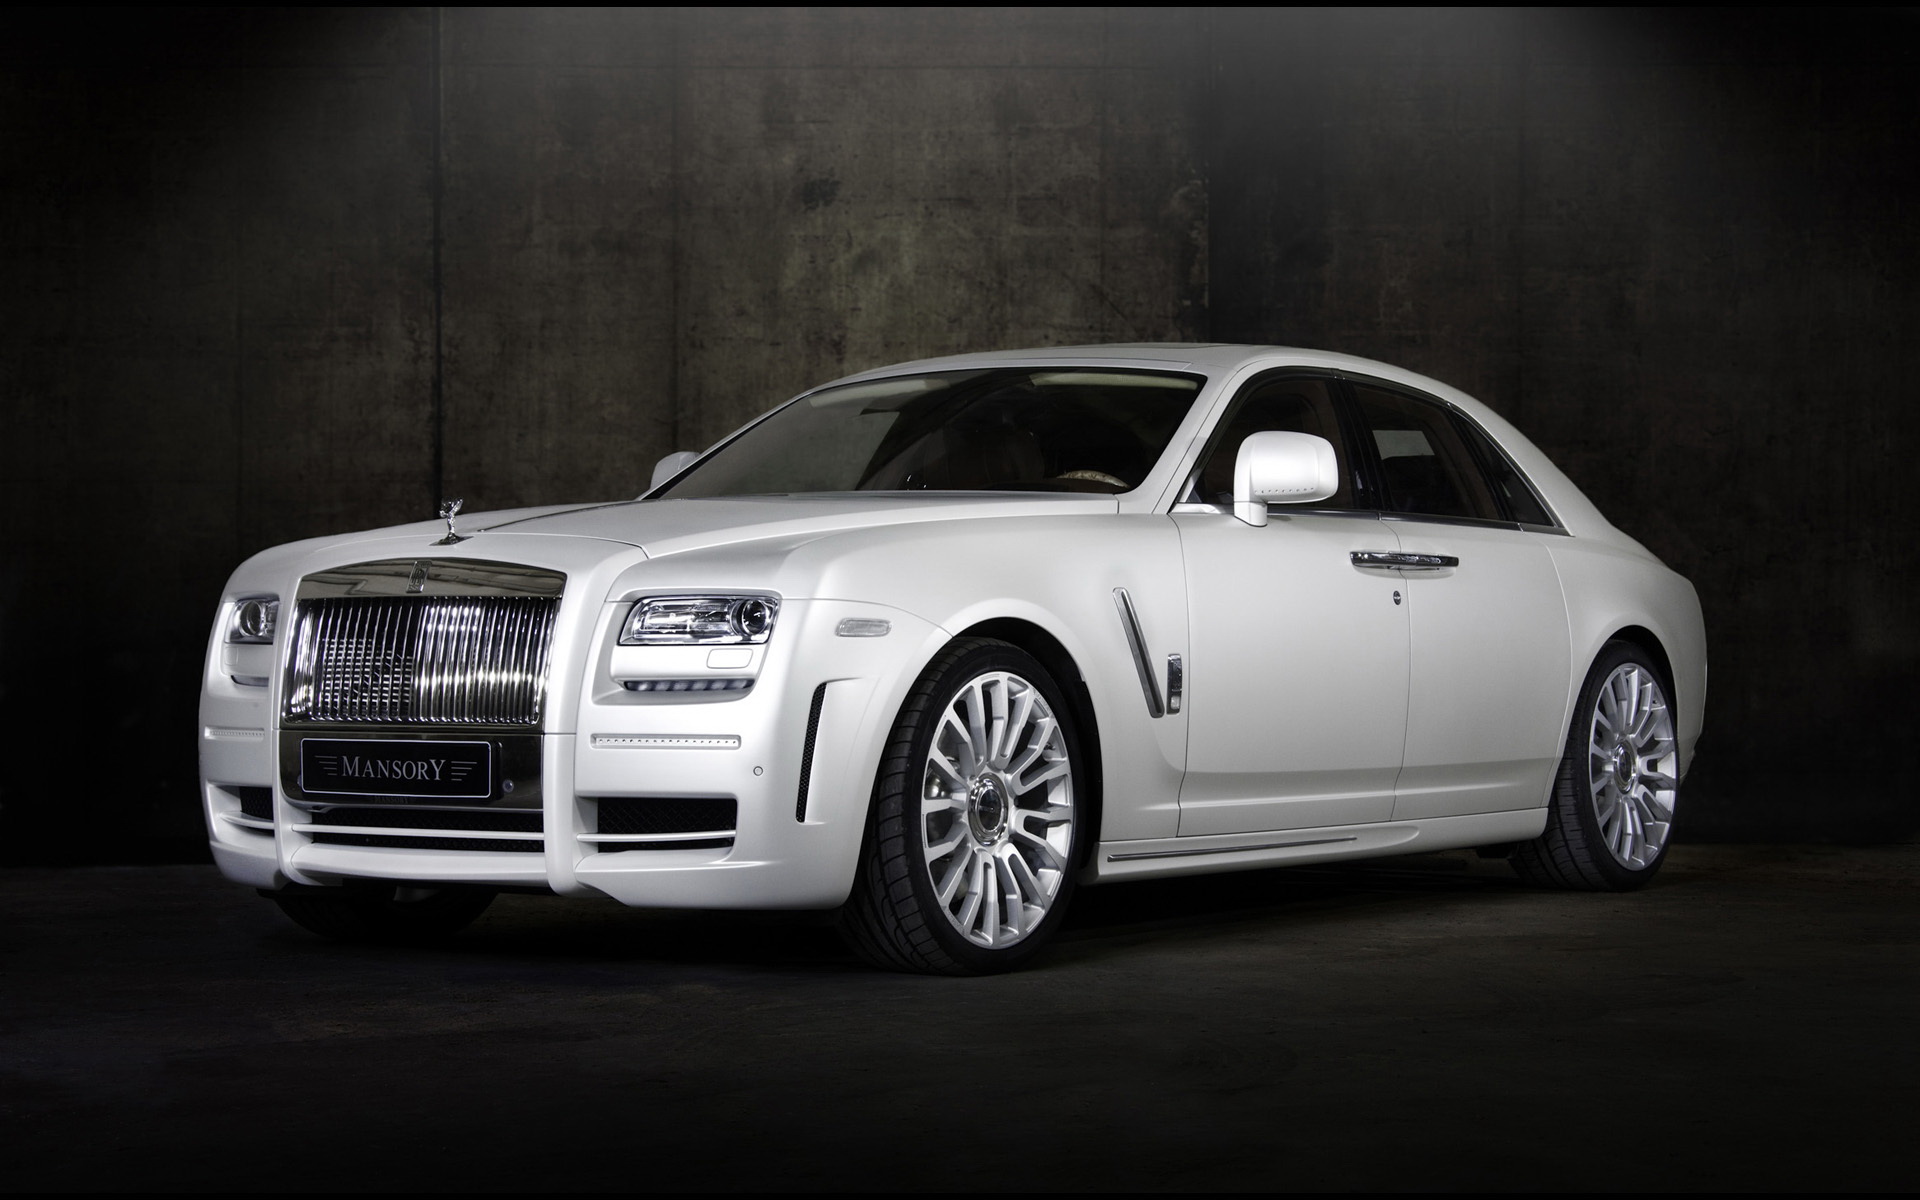 2010 Mansory Rolls-Royce(˹˹) White Ghost Limited(ֽ2)